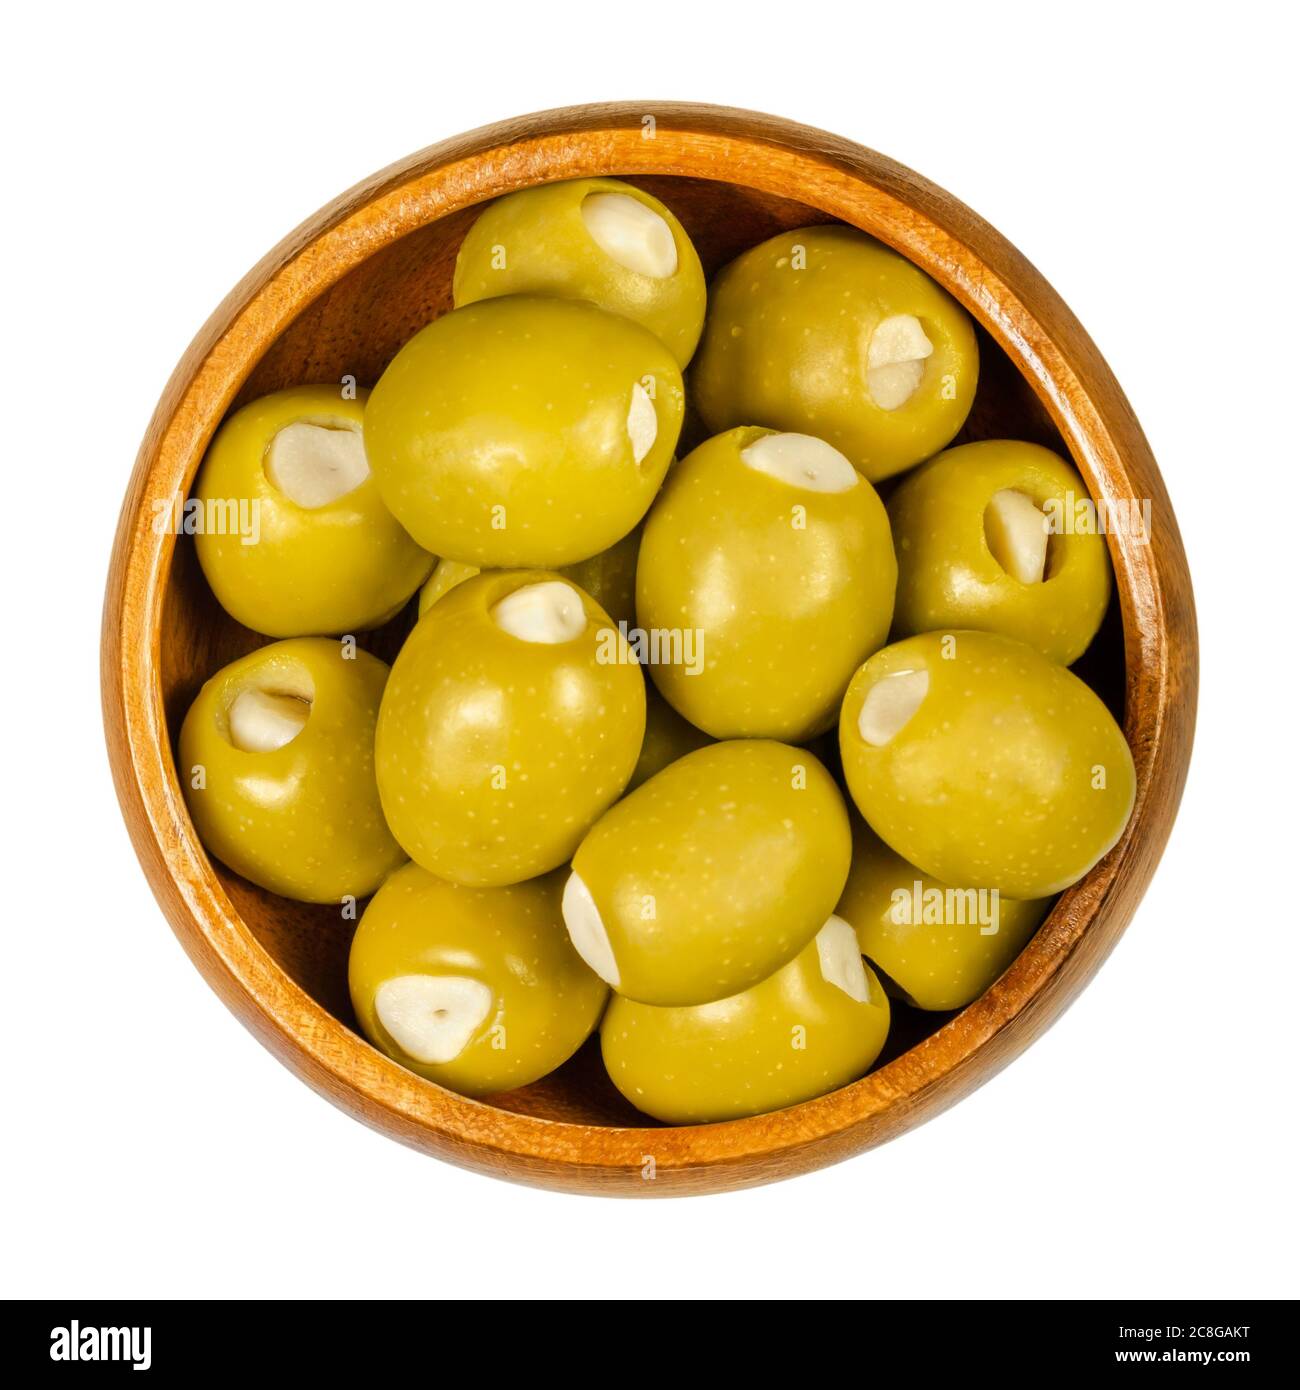 Green olives stuffed with garlic cloves in wooden bowl. Big olives, fruits of Olea europaea, hand filled with pickled garlic pieces. Closeup. Stock Photo